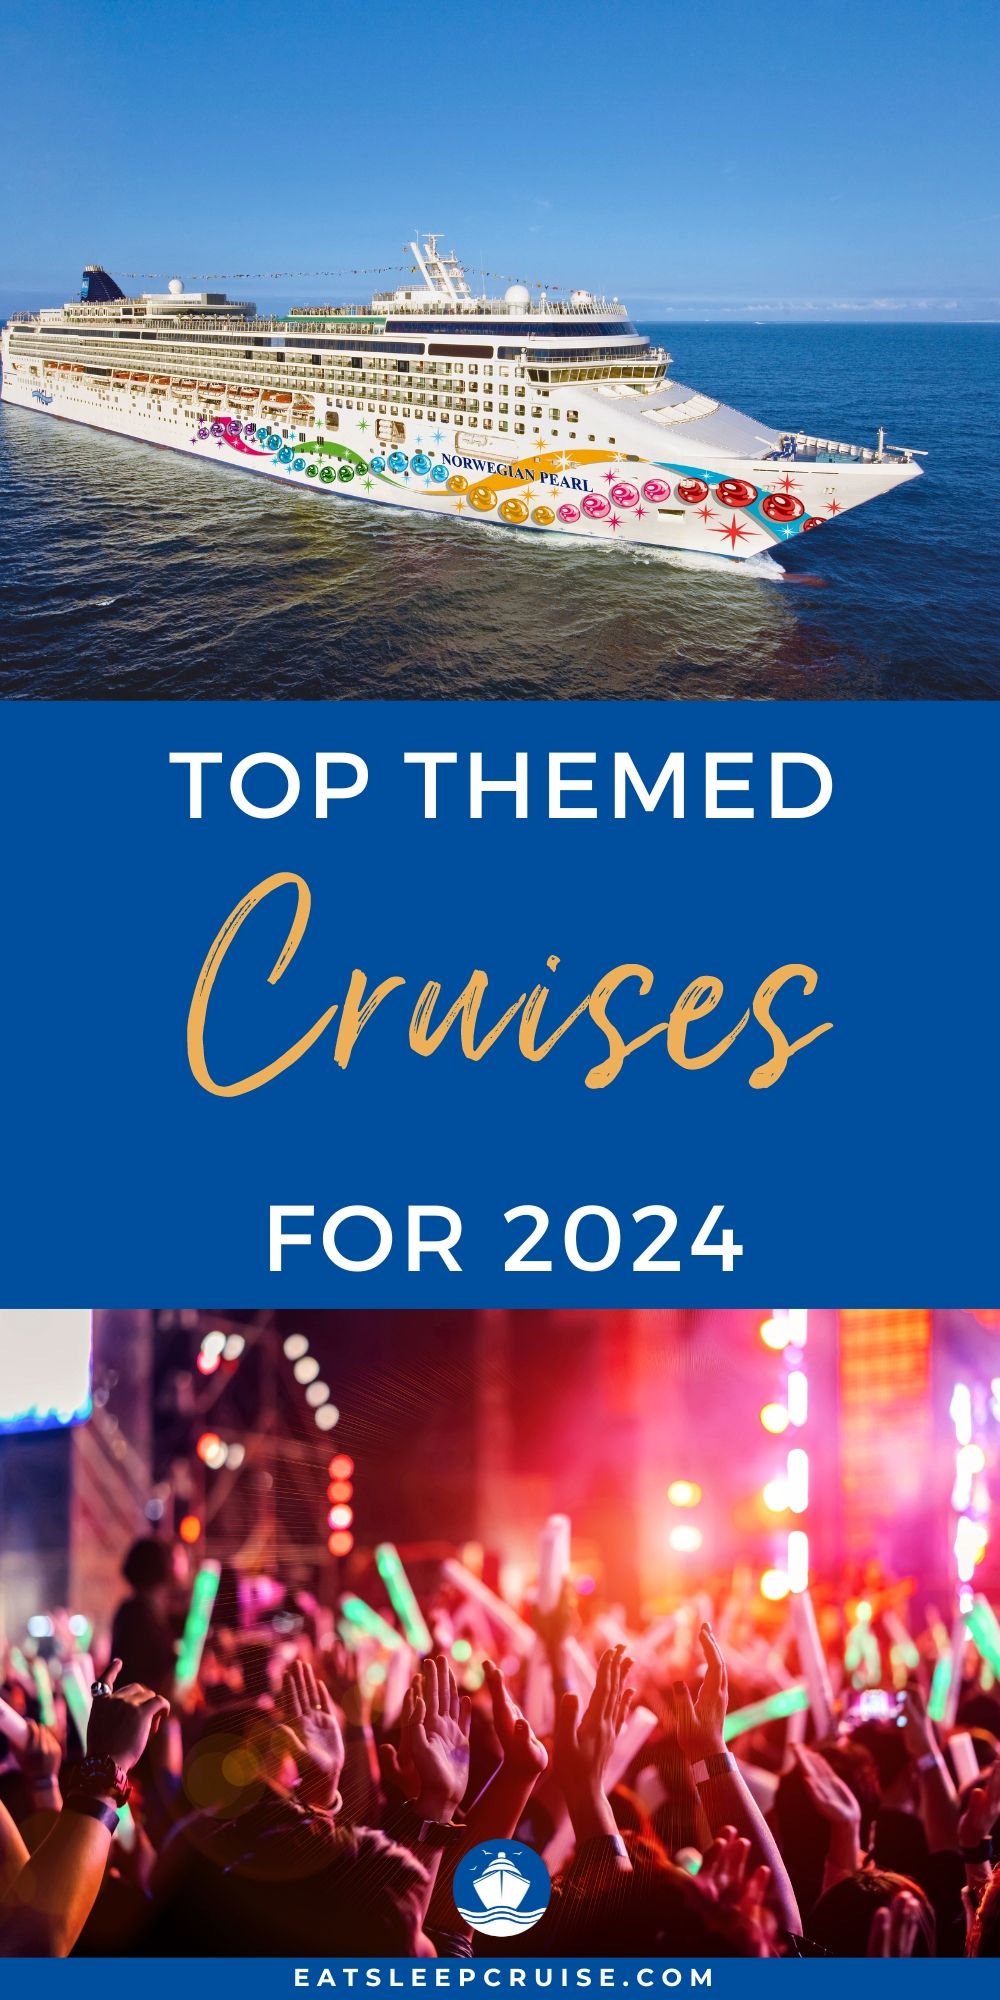 Top Themed Cruises for 2024